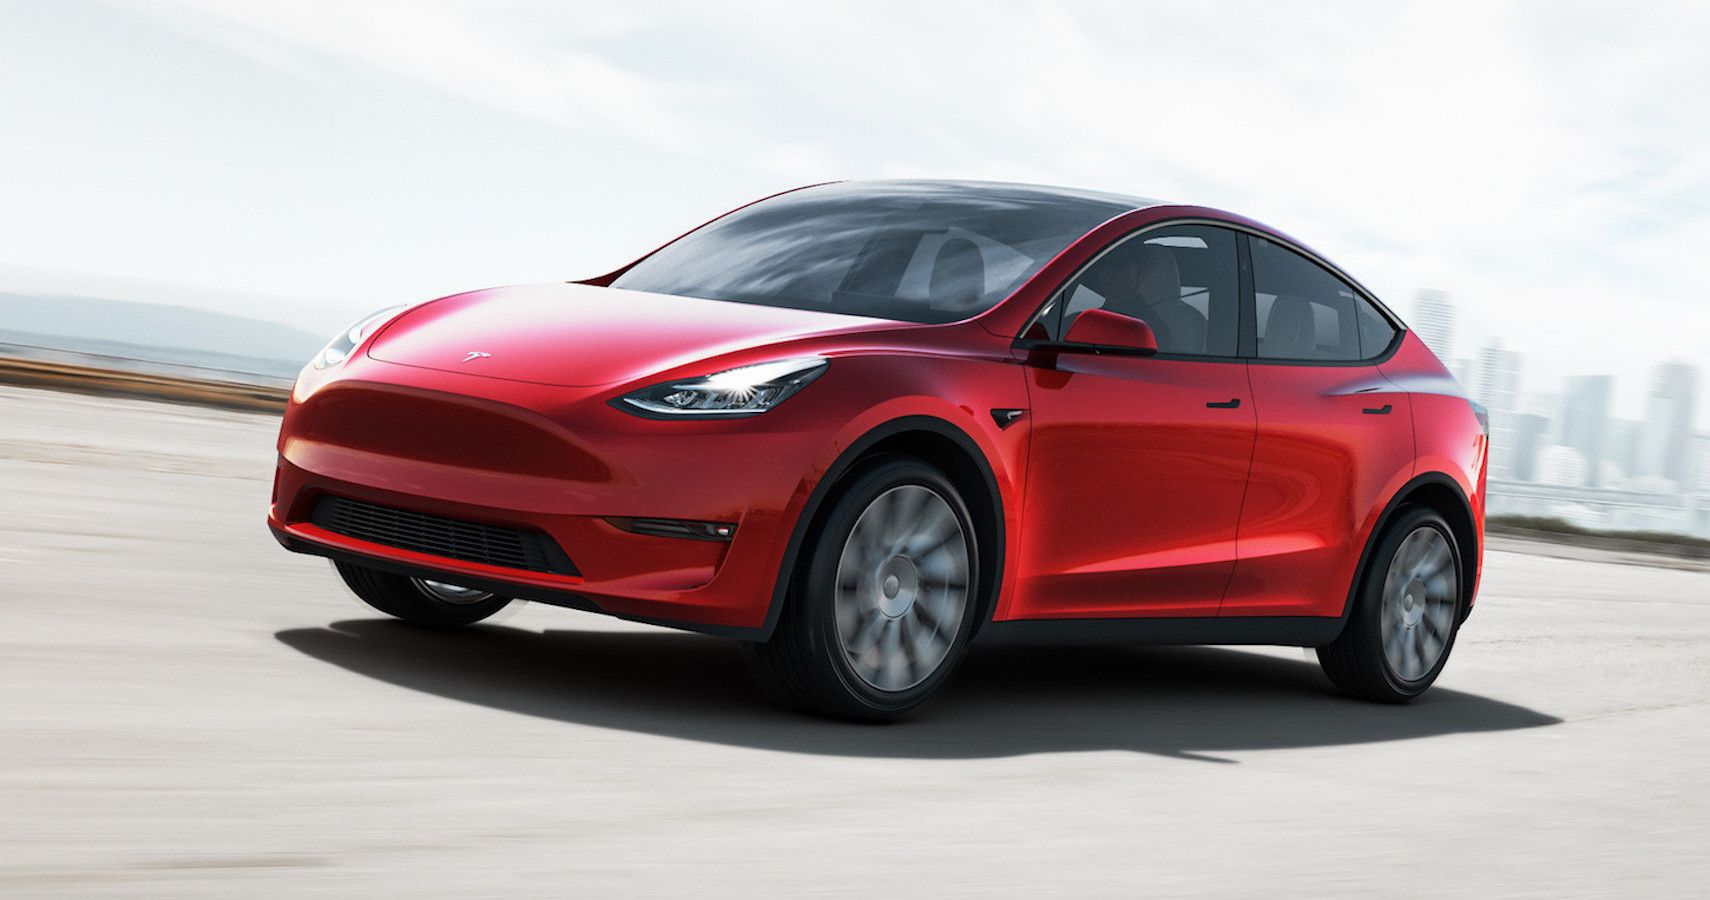 The Top Benefits Of Owning A Tesla, According To Model Y-Owning YouTuber